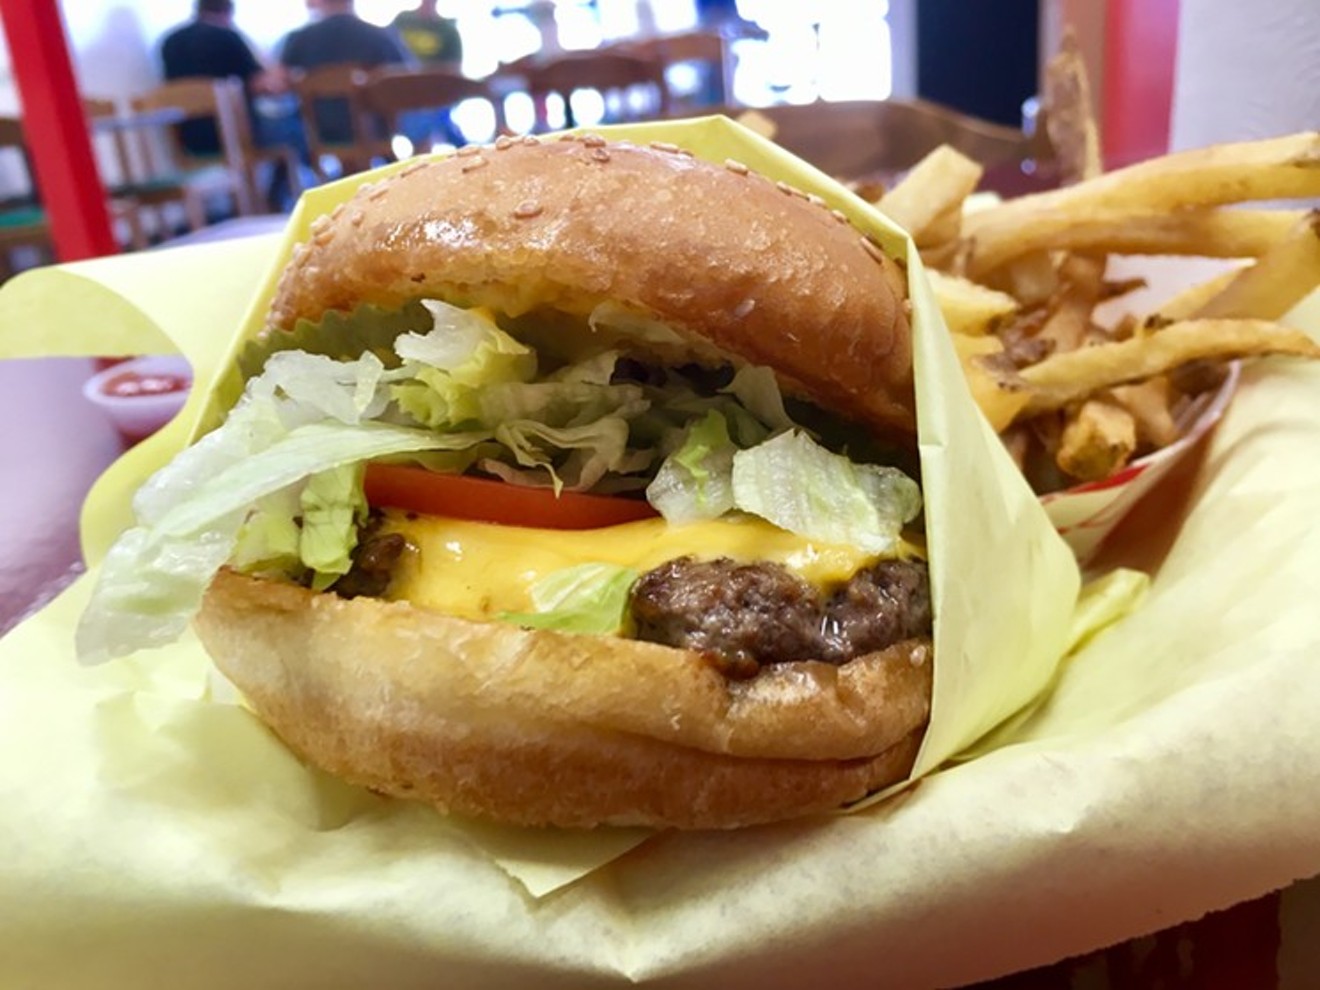 The burger at Sky Rocket is loved here, well enough to land on a national-best list for Yelp.